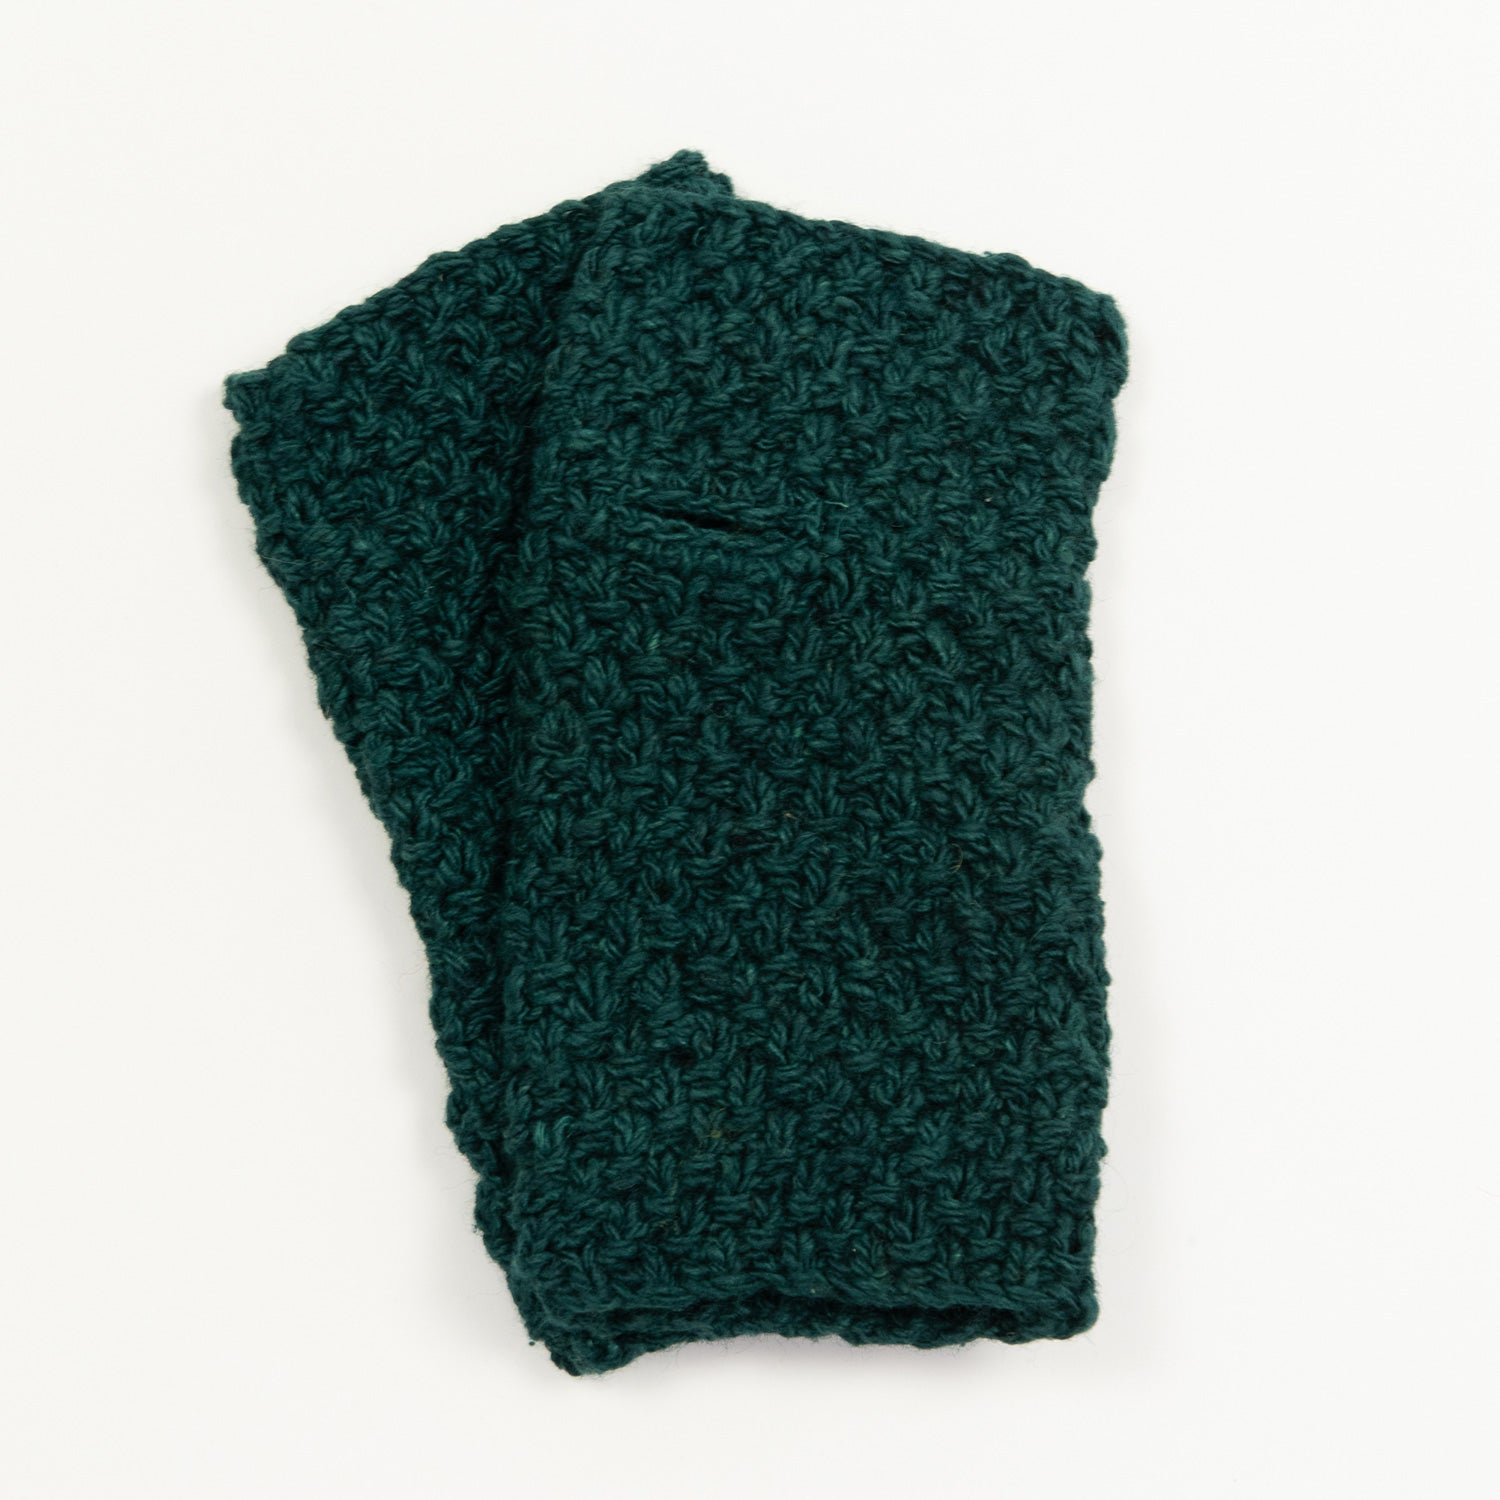 Two teal green wristwarmers pictured on a white background.